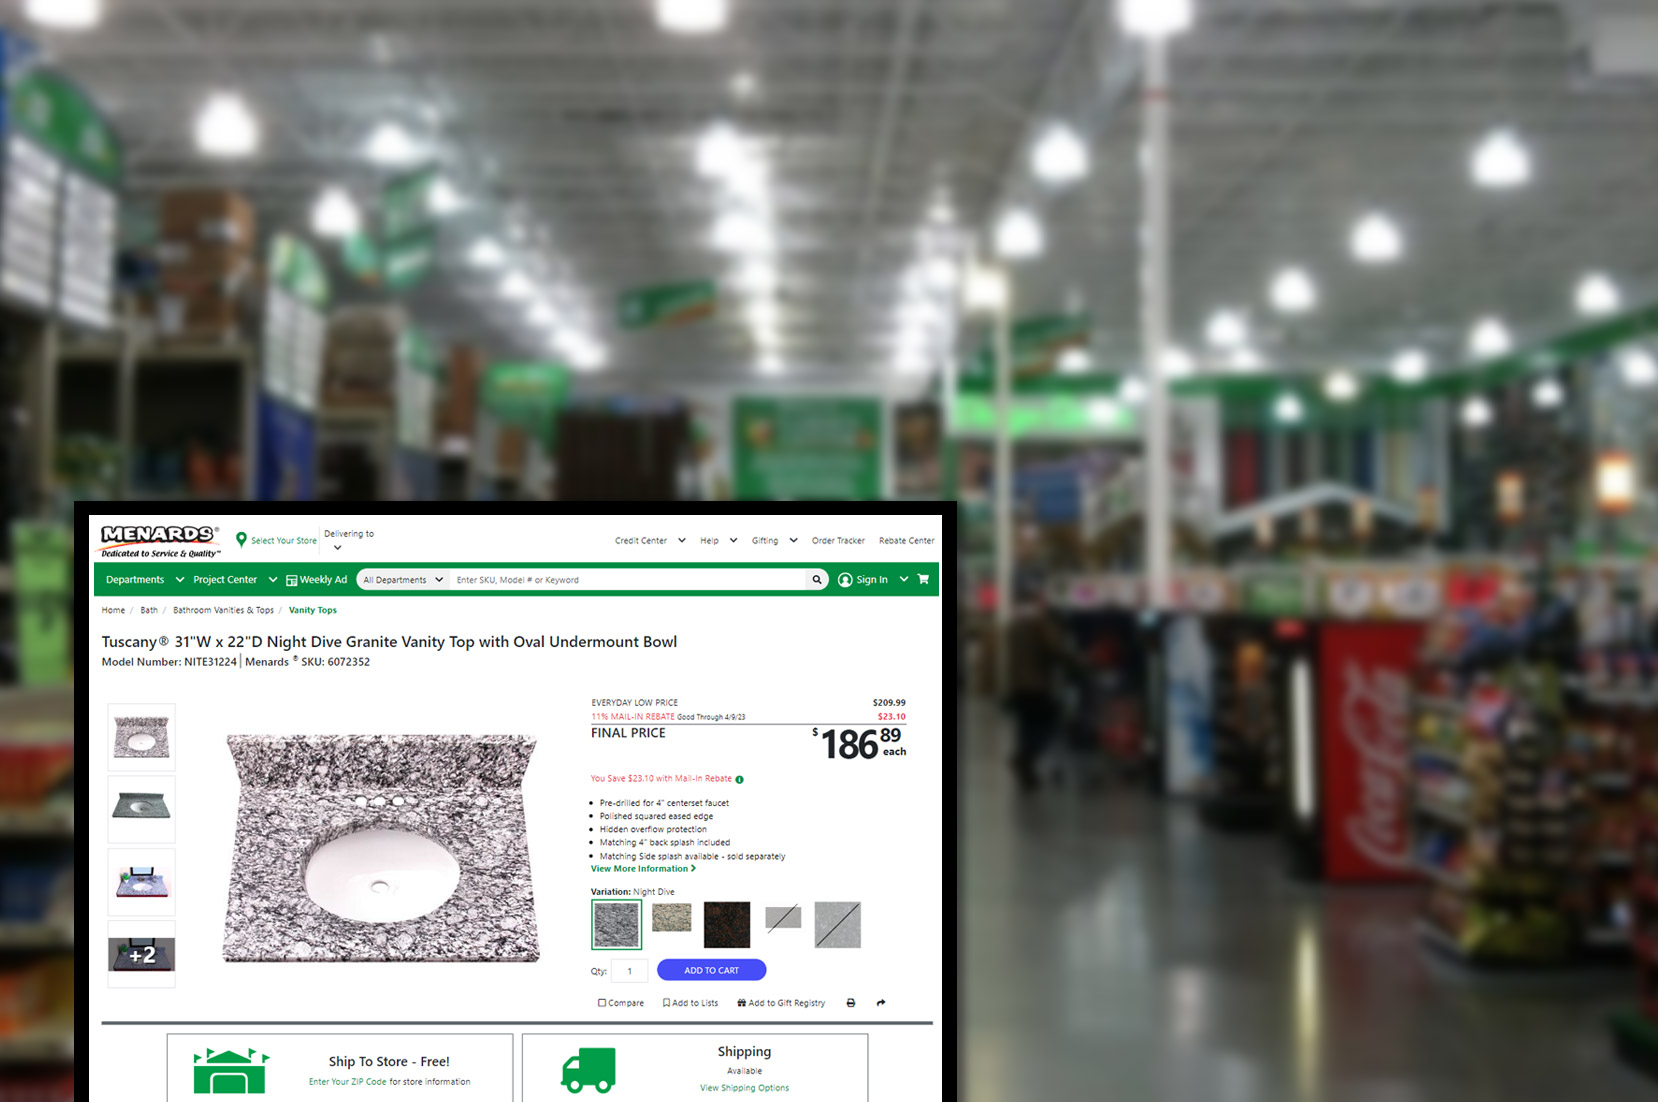 menards-comproduct-pricing-information-and-image-scraping-services